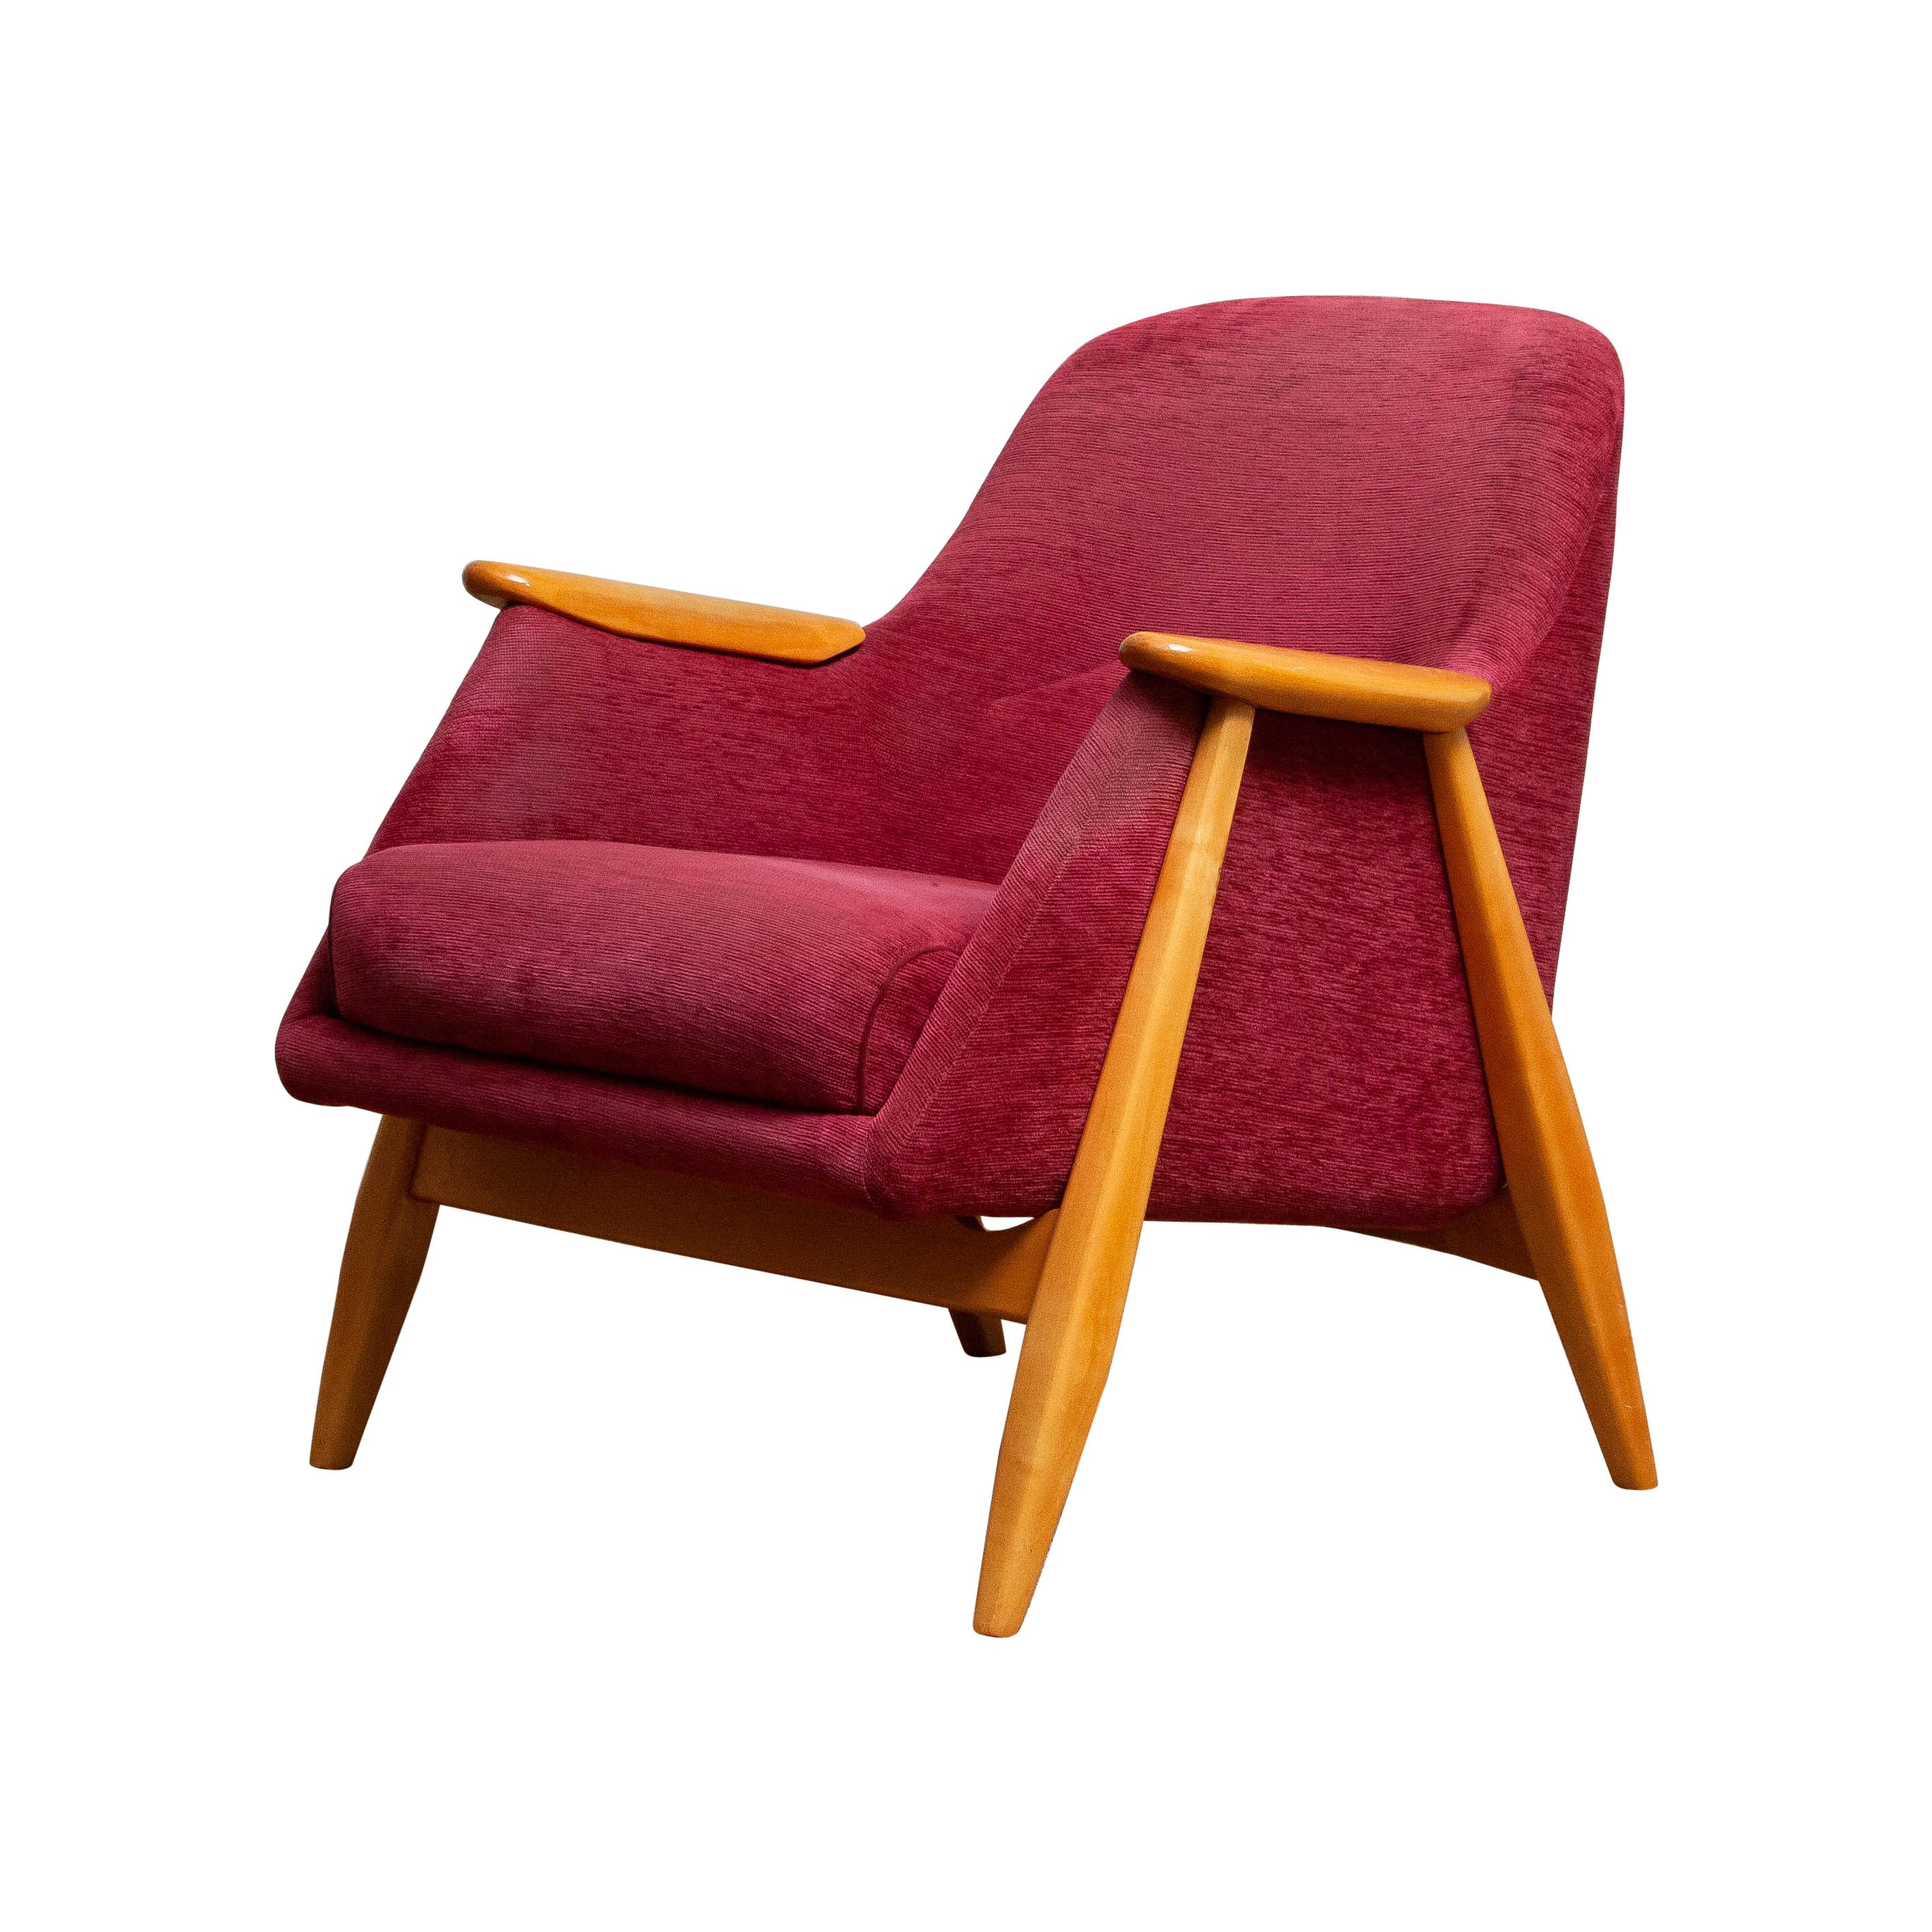 Very nice arm / easy chair designed by Svante Skogh for Asko Finland.
This chair is made of beech and original dark pink chenille/baby-roy fabric.
It is in a good condition.
Period: 1950s
Dimensions: H.75 cm, W.70 cm, D.66 cm.